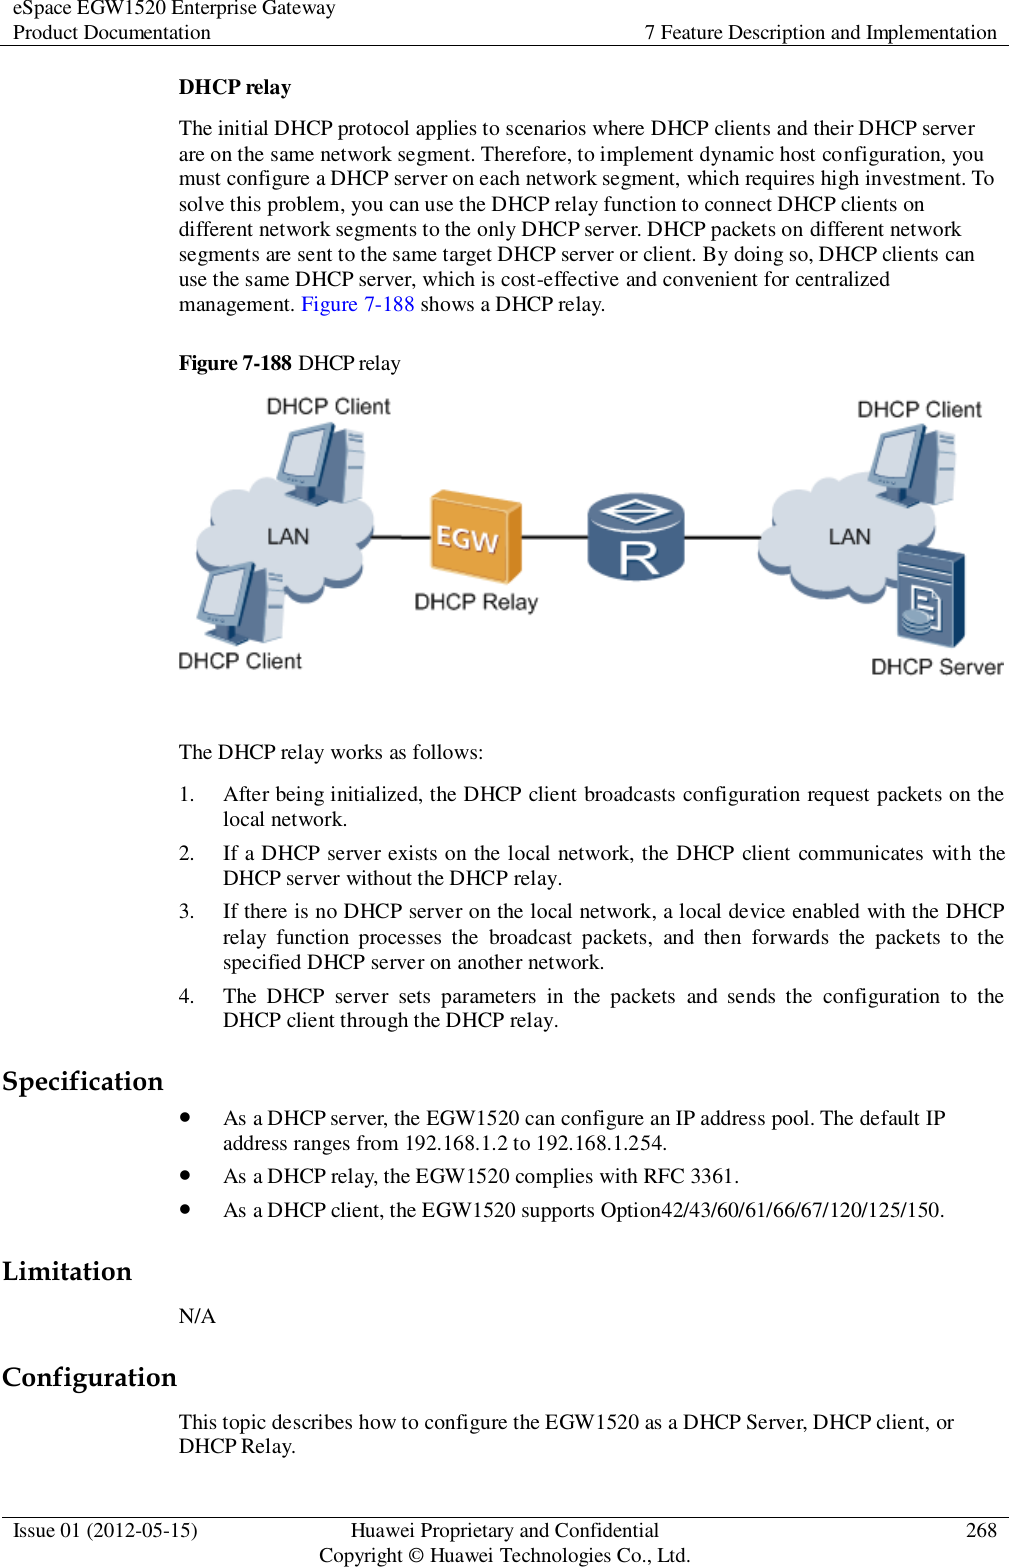 eSpace EGW1520 Enterprise Gateway Product Documentation 7 Feature Description and Implementation  Issue 01 (2012-05-15) Huawei Proprietary and Confidential                                     Copyright © Huawei Technologies Co., Ltd. 268  DHCP relay The initial DHCP protocol applies to scenarios where DHCP clients and their DHCP server are on the same network segment. Therefore, to implement dynamic host configuration, you must configure a DHCP server on each network segment, which requires high investment. To solve this problem, you can use the DHCP relay function to connect DHCP clients on different network segments to the only DHCP server. DHCP packets on different network segments are sent to the same target DHCP server or client. By doing so, DHCP clients can use the same DHCP server, which is cost-effective and convenient for centralized management. Figure 7-188 shows a DHCP relay. Figure 7-188 DHCP relay   The DHCP relay works as follows: 1. After being initialized, the DHCP client broadcasts configuration request packets on the local network. 2. If a DHCP server exists on the local network, the DHCP client communicates with the DHCP server without the DHCP relay. 3. If there is no DHCP server on the local network, a local device enabled with the DHCP relay  function  processes  the  broadcast  packets,  and  then  forwards  the  packets  to  the specified DHCP server on another network. 4. The  DHCP  server  sets  parameters  in  the  packets  and  sends  the  configuration  to  the DHCP client through the DHCP relay. Specification  As a DHCP server, the EGW1520 can configure an IP address pool. The default IP address ranges from 192.168.1.2 to 192.168.1.254.  As a DHCP relay, the EGW1520 complies with RFC 3361.  As a DHCP client, the EGW1520 supports Option42/43/60/61/66/67/120/125/150. Limitation N/A Configuration This topic describes how to configure the EGW1520 as a DHCP Server, DHCP client, or DHCP Relay. 